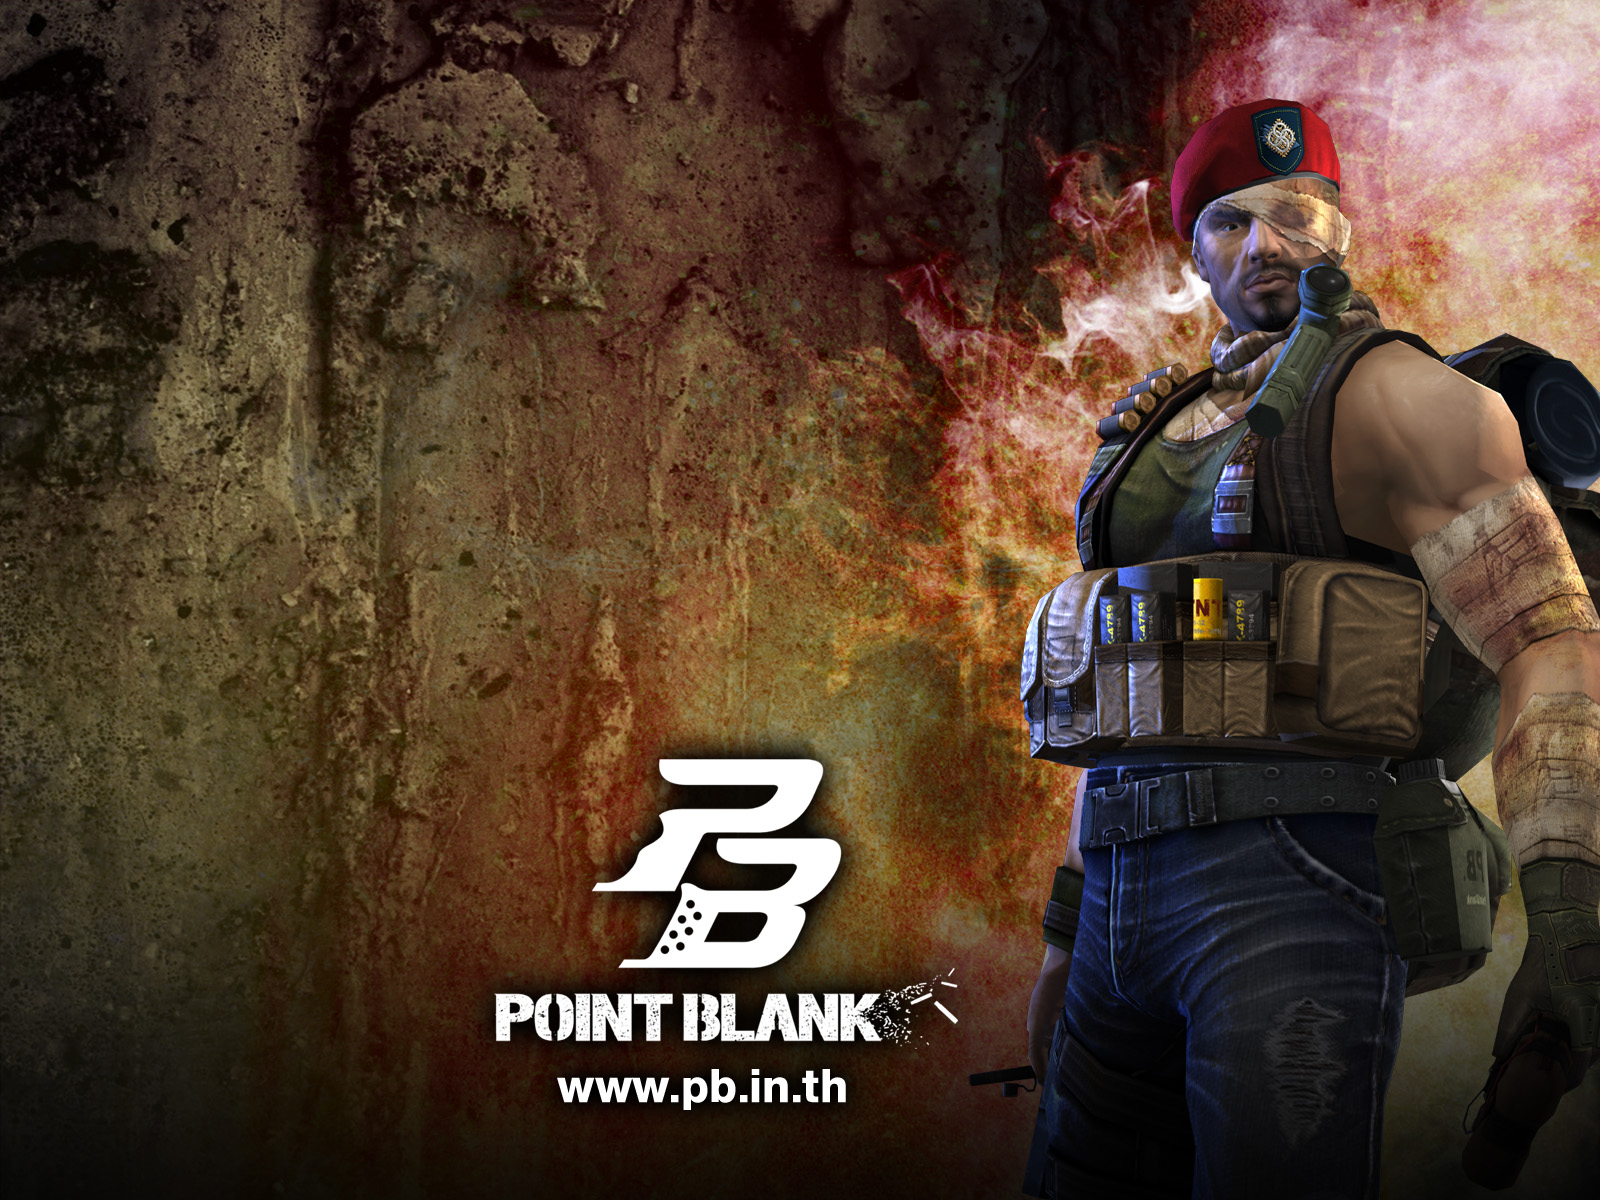 wallpaper point blank keren,action adventure game,pc game,shooter game,fictional character,movie